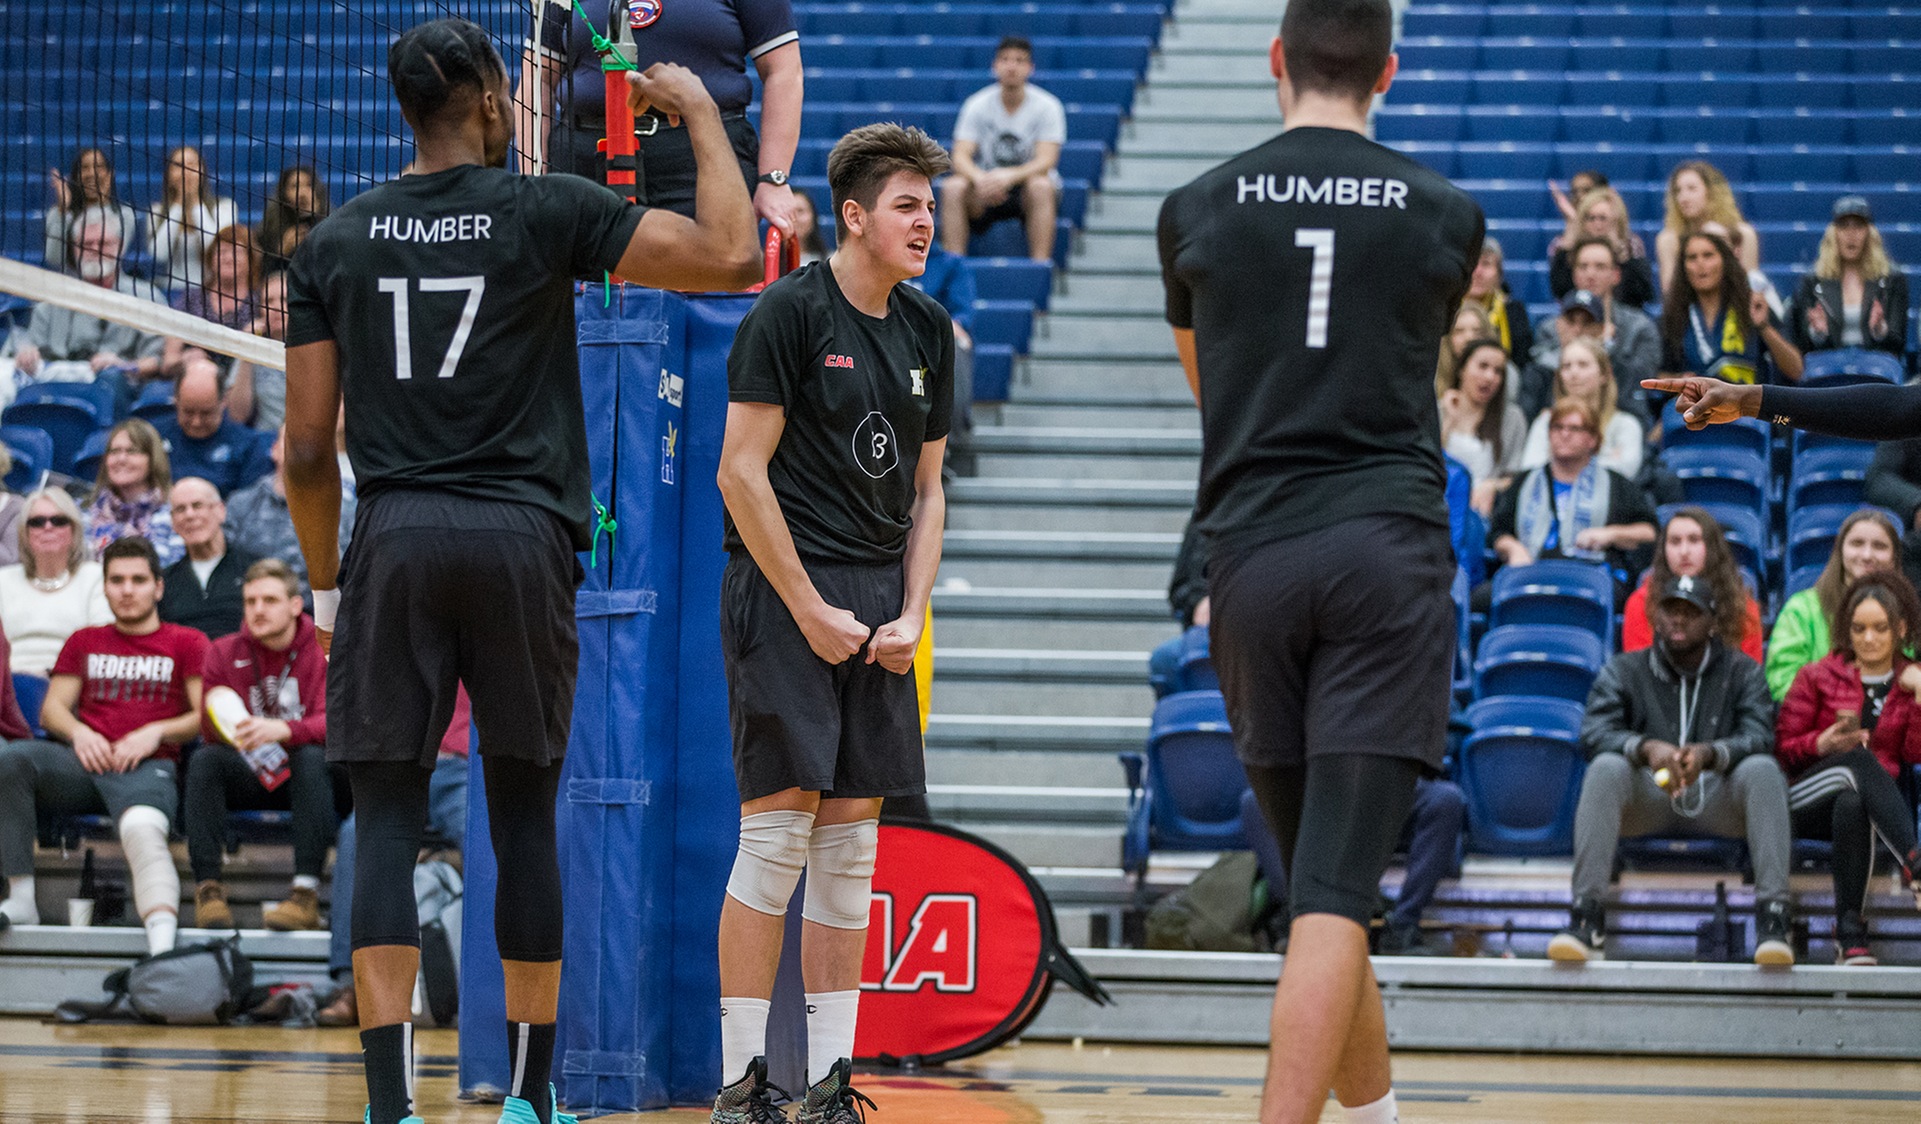 No. 5 HUMBER ADVANCES TO FINALS WITH WIN OVER NIAGARA; EARNS NATIONALS BERTH